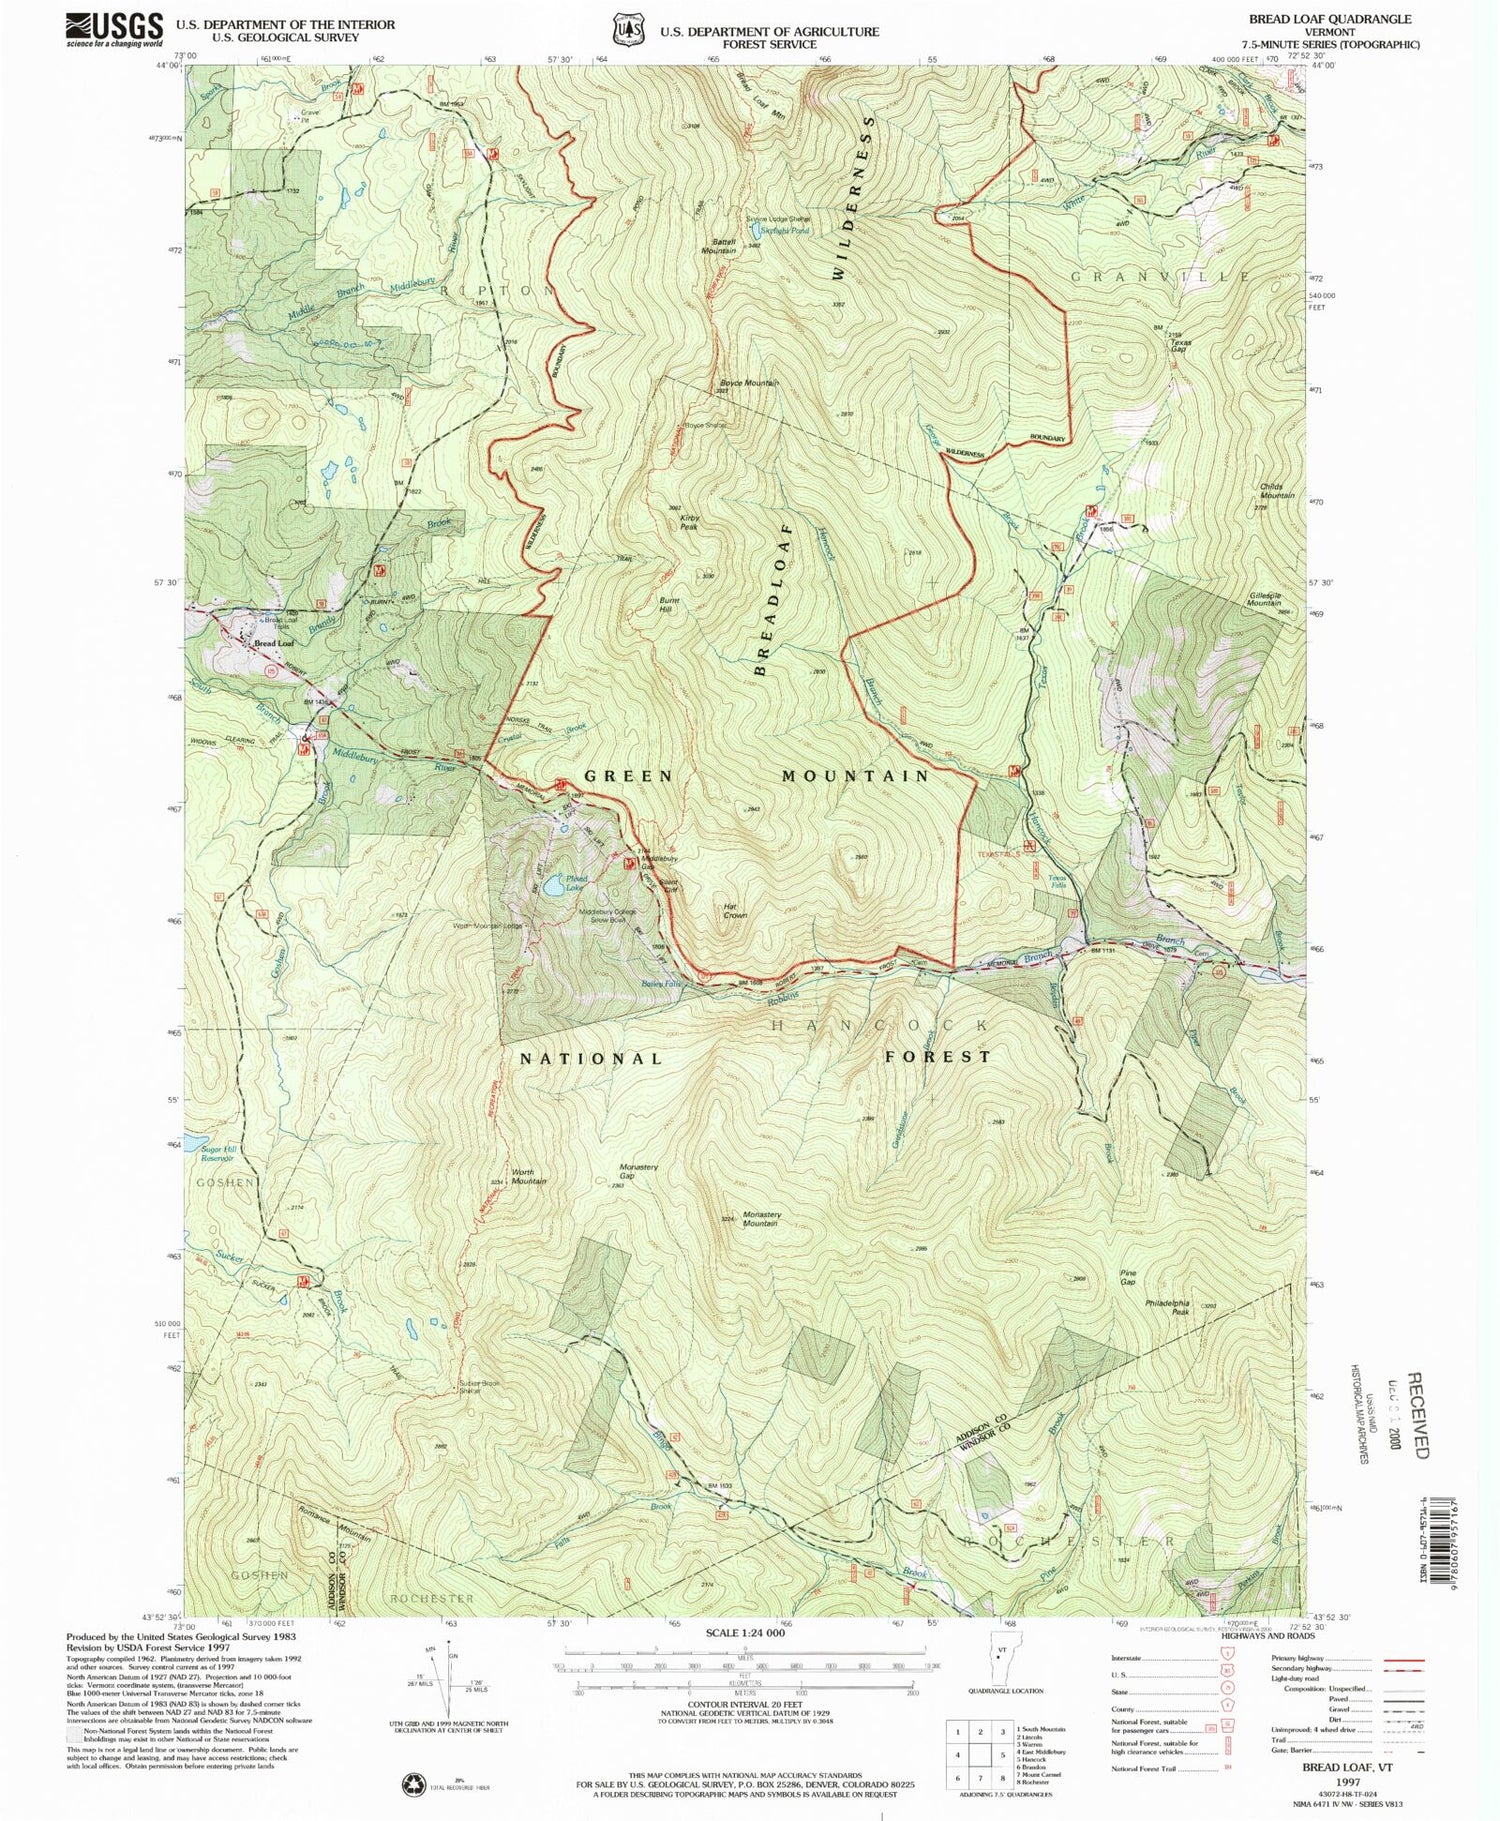 Classic USGS Bread Loaf Vermont 7.5'x7.5' Topo Map Image